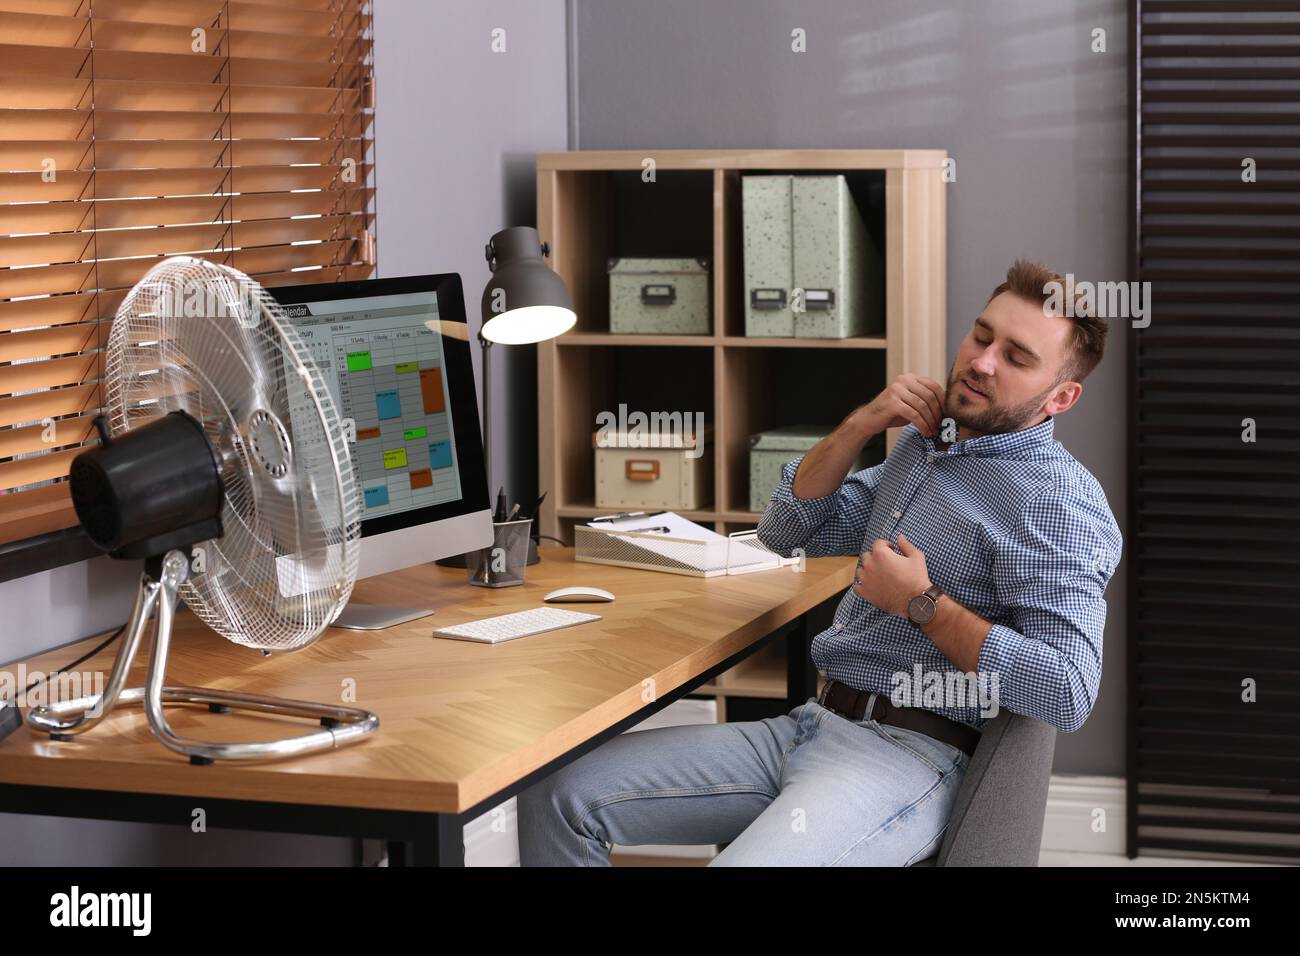 Man suffering from heat in front of fan at workplace Stock Photo